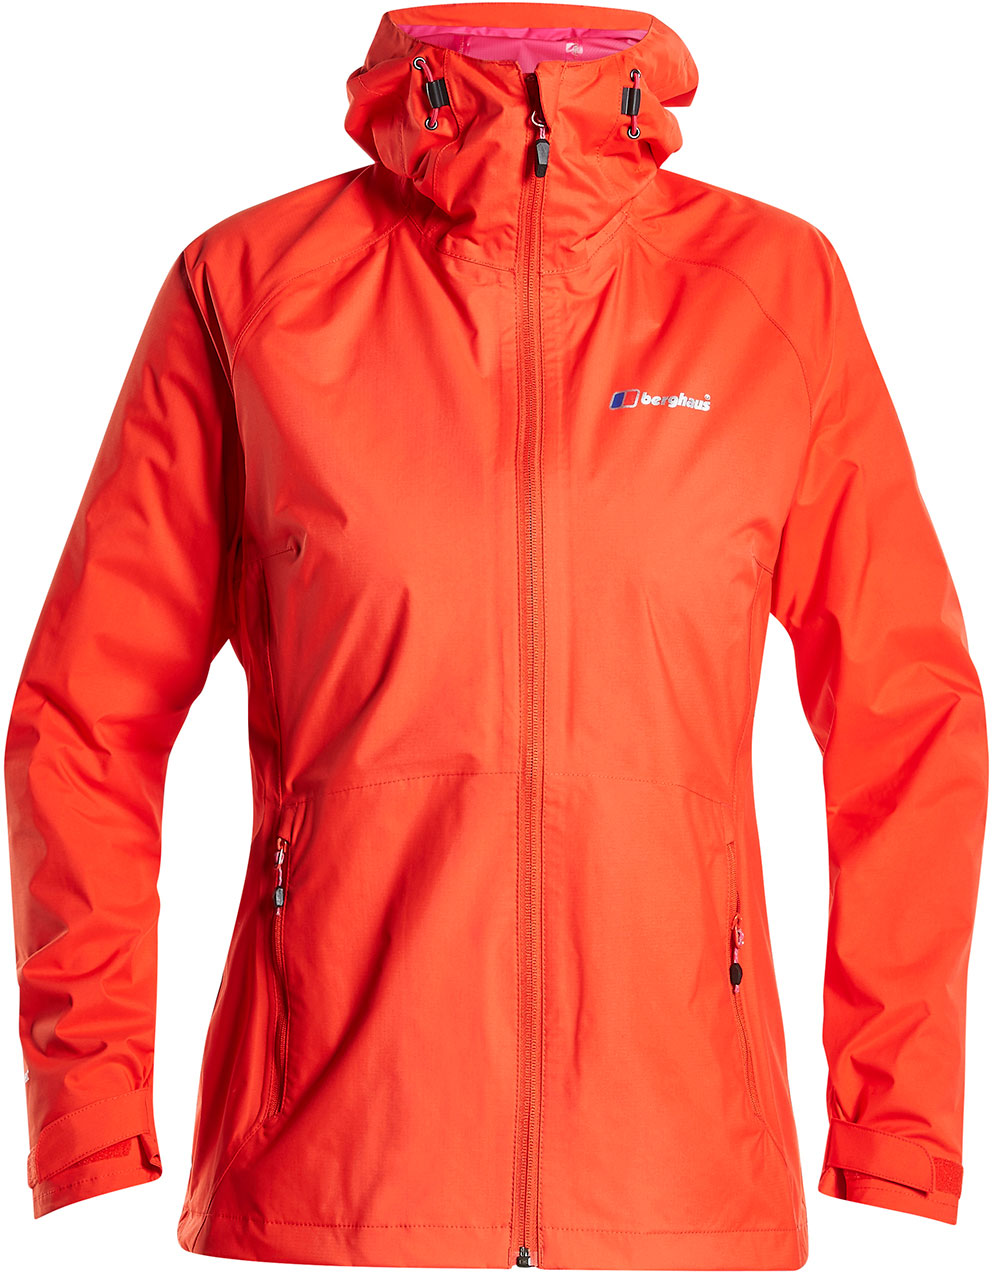 Berghaus Stormcloud Womens Waterproof Jacket for protection and style